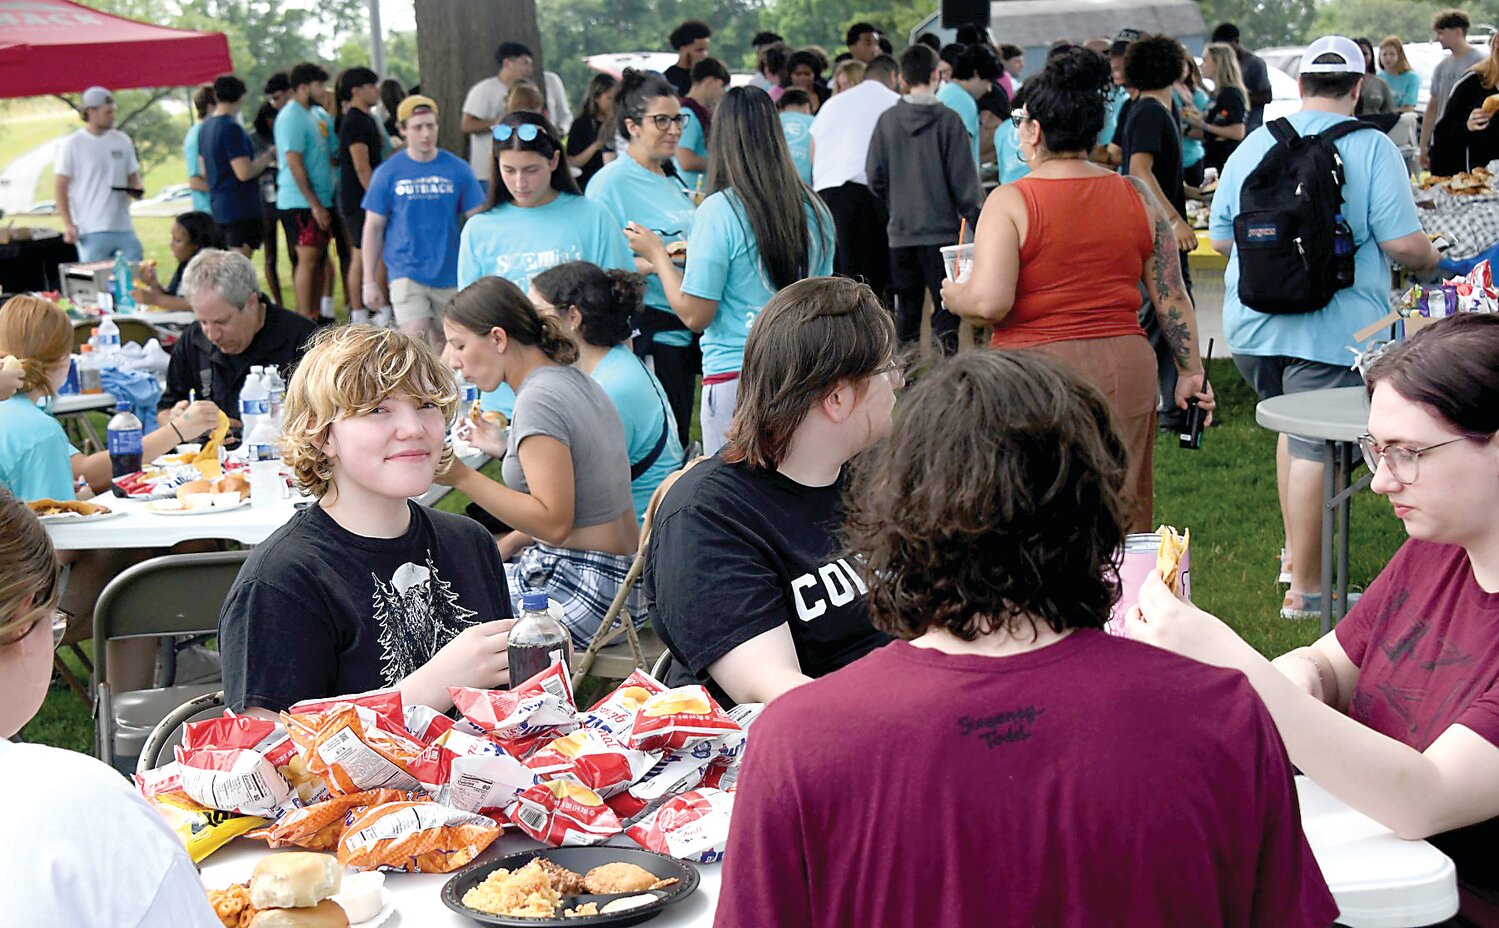 Many Bensalem High School seniors showed up at Sophia’s Senior Tailgate for food, games and lotteries Wednesday.